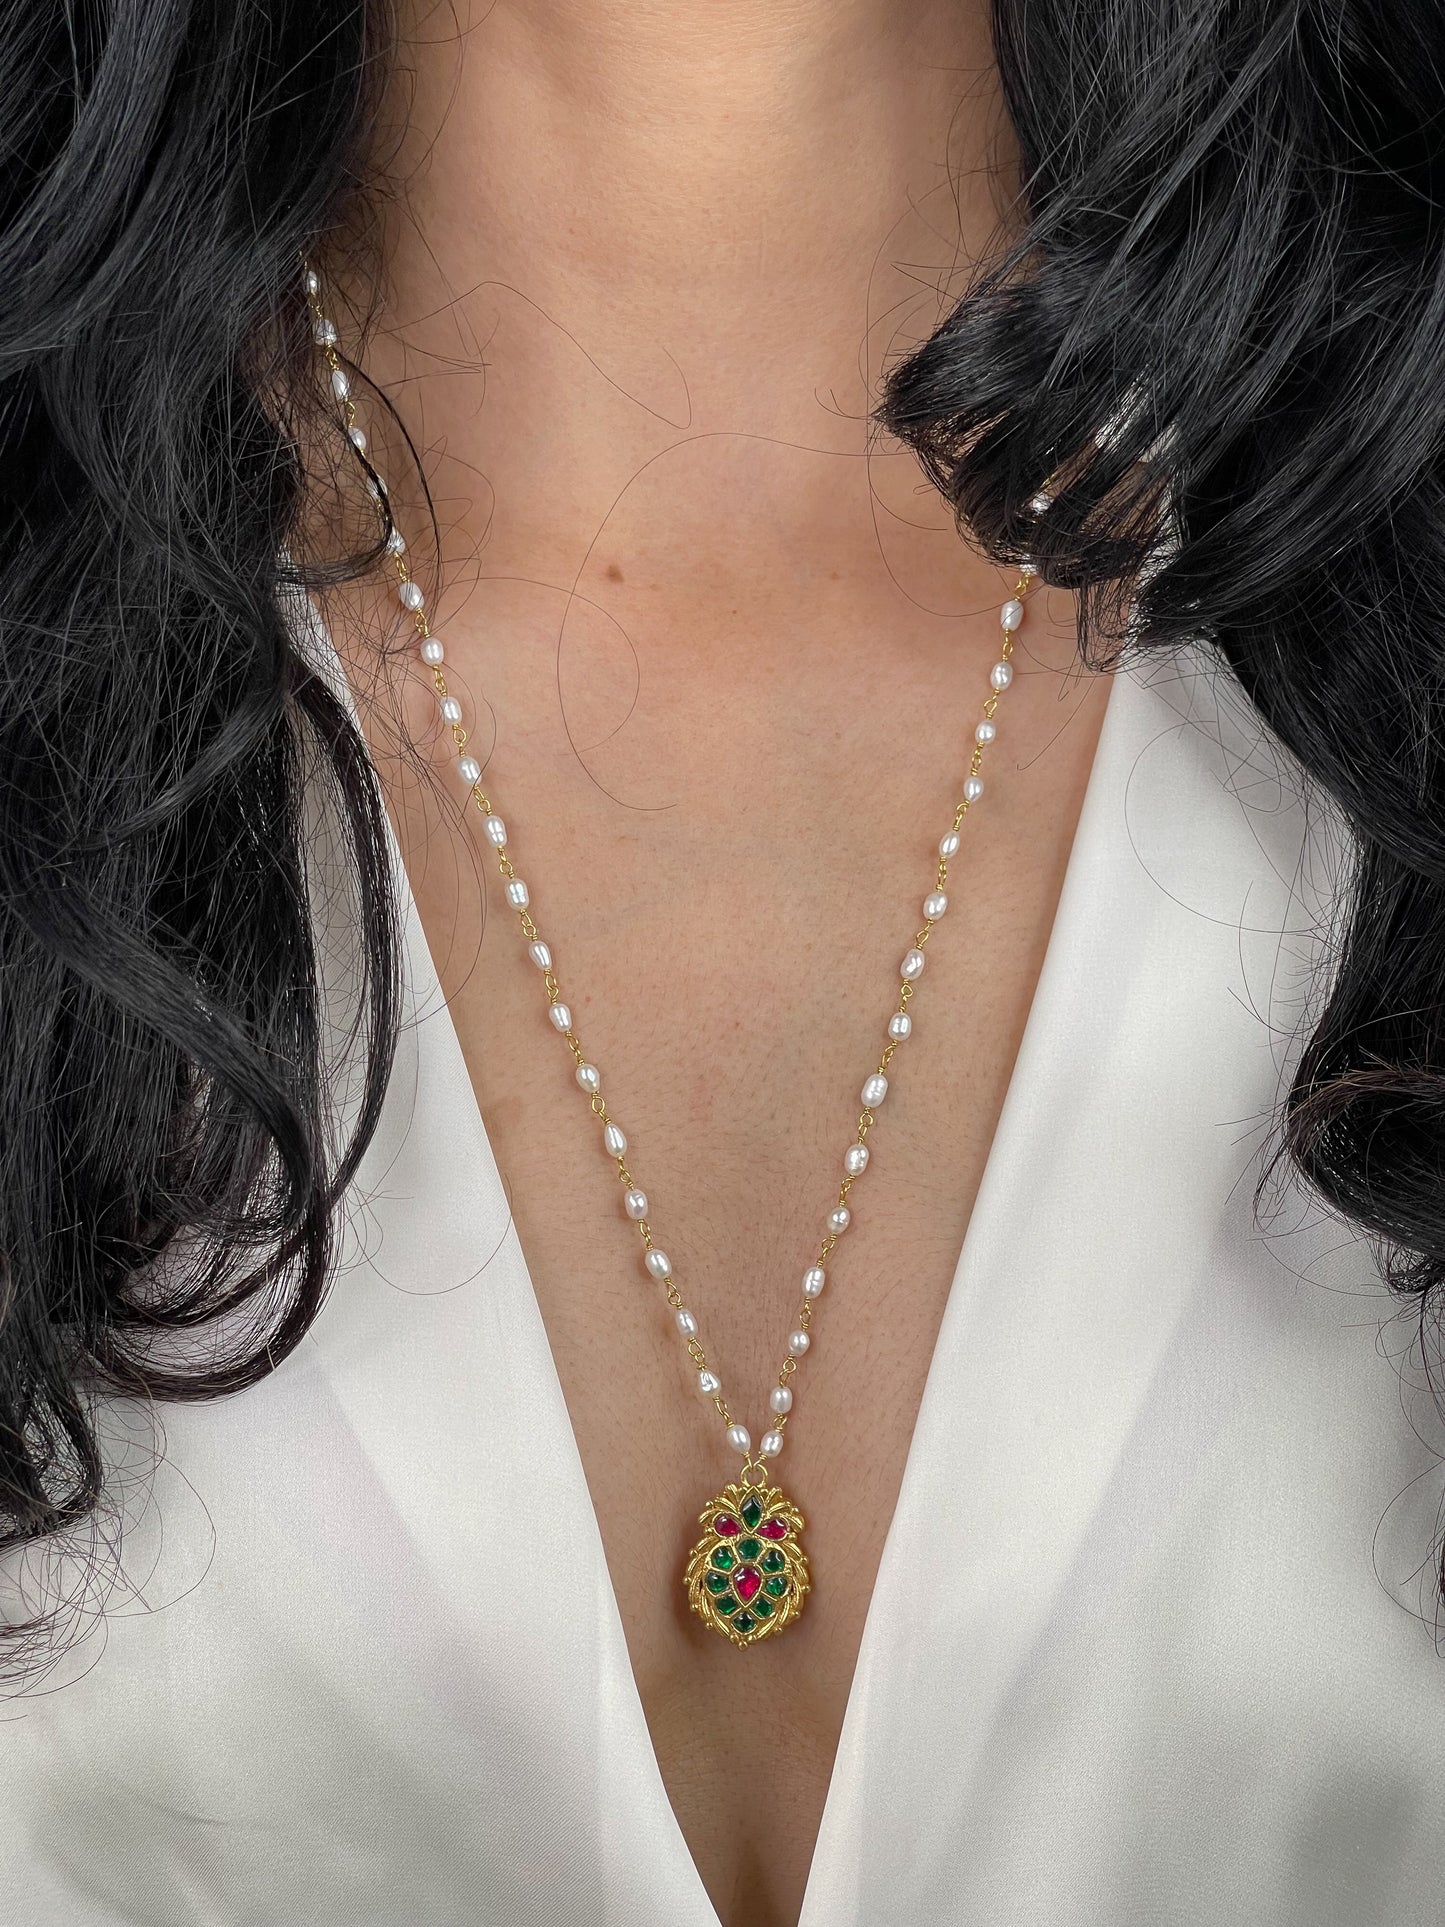 Pearl chain with colour full stone pendant.